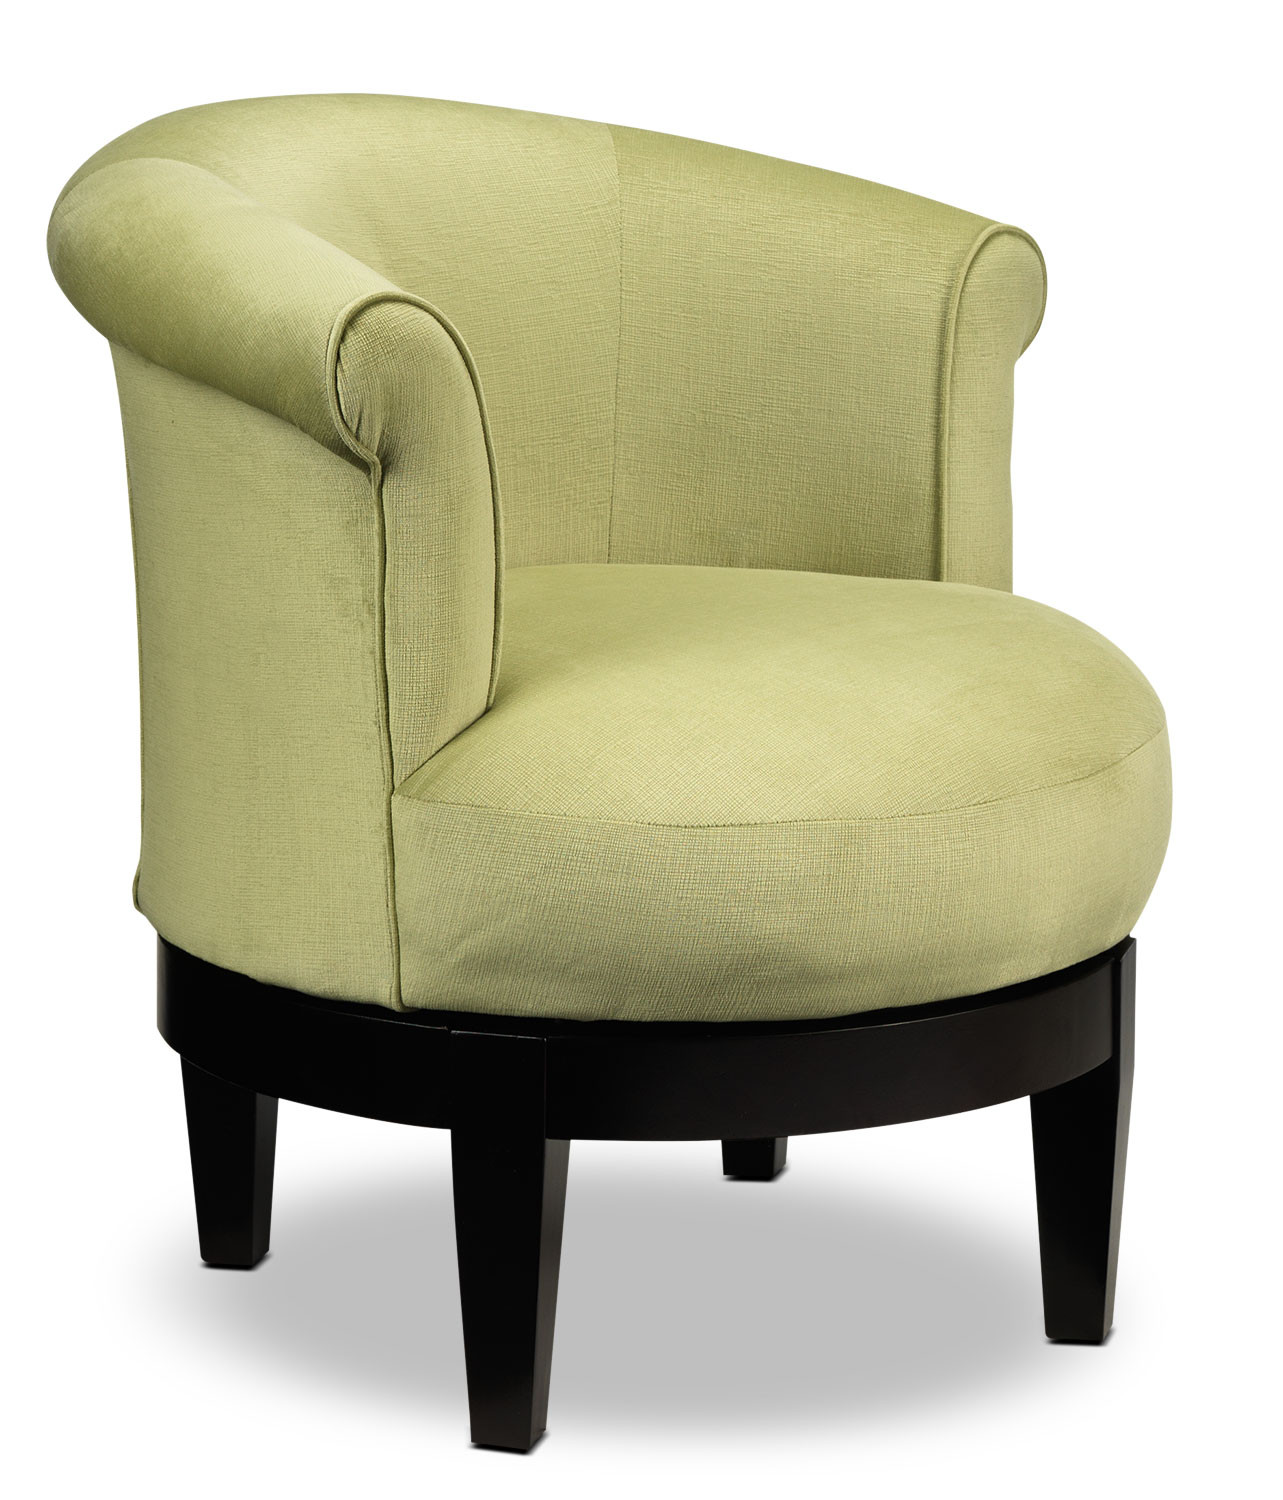 Swivel Living Room Chair
 Attica Accent Swivel Chair Lime